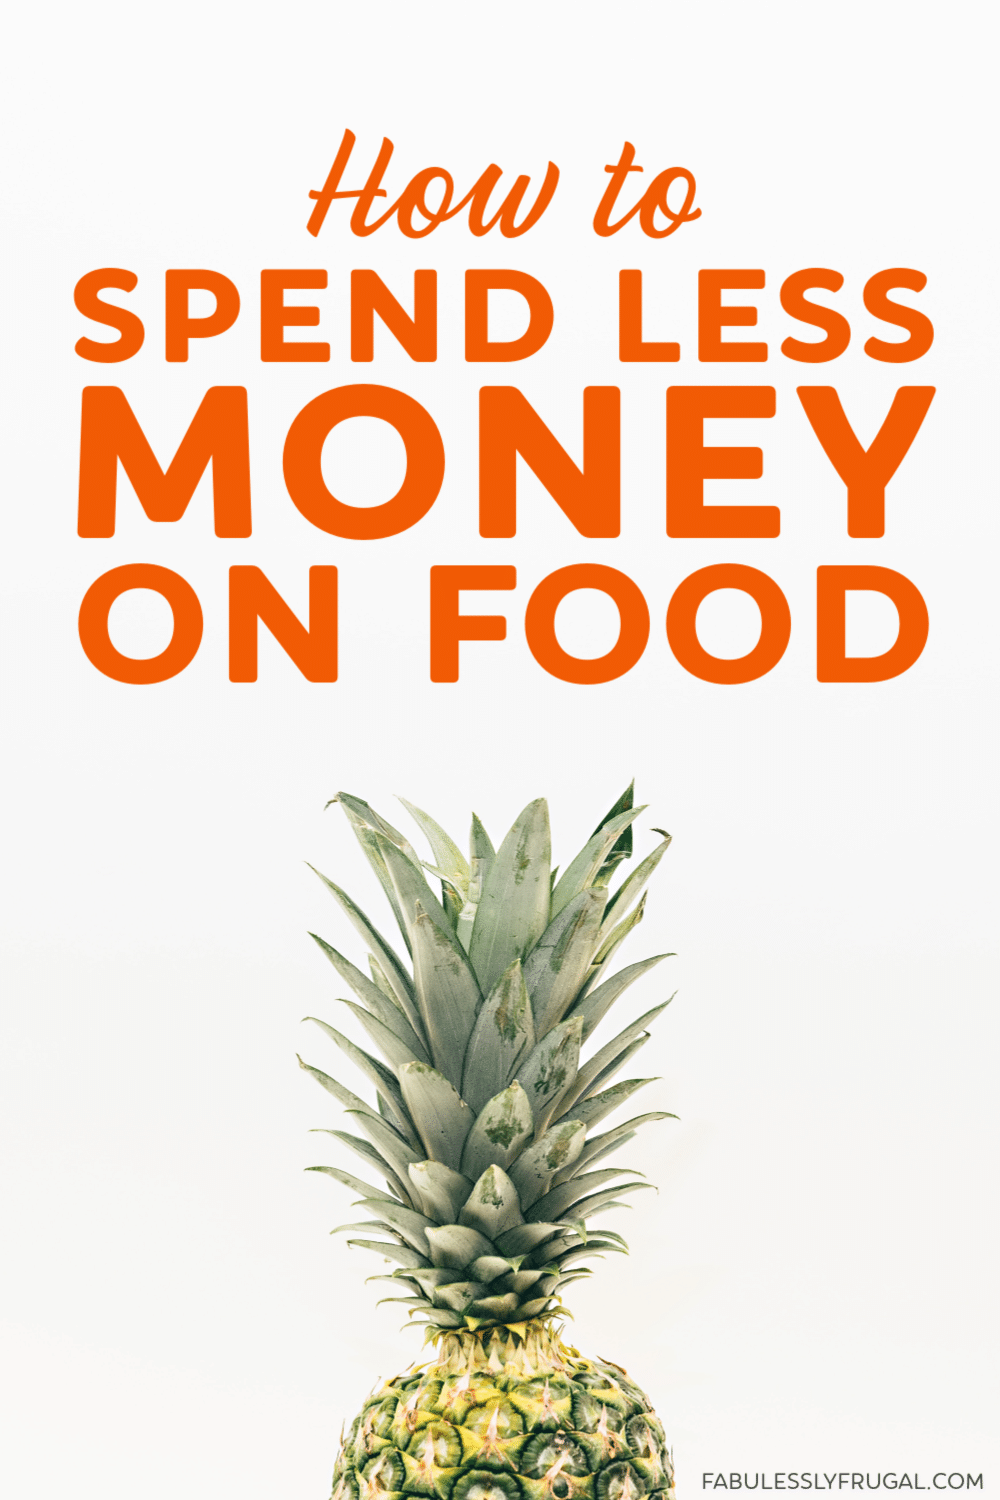 How to spend less money on food